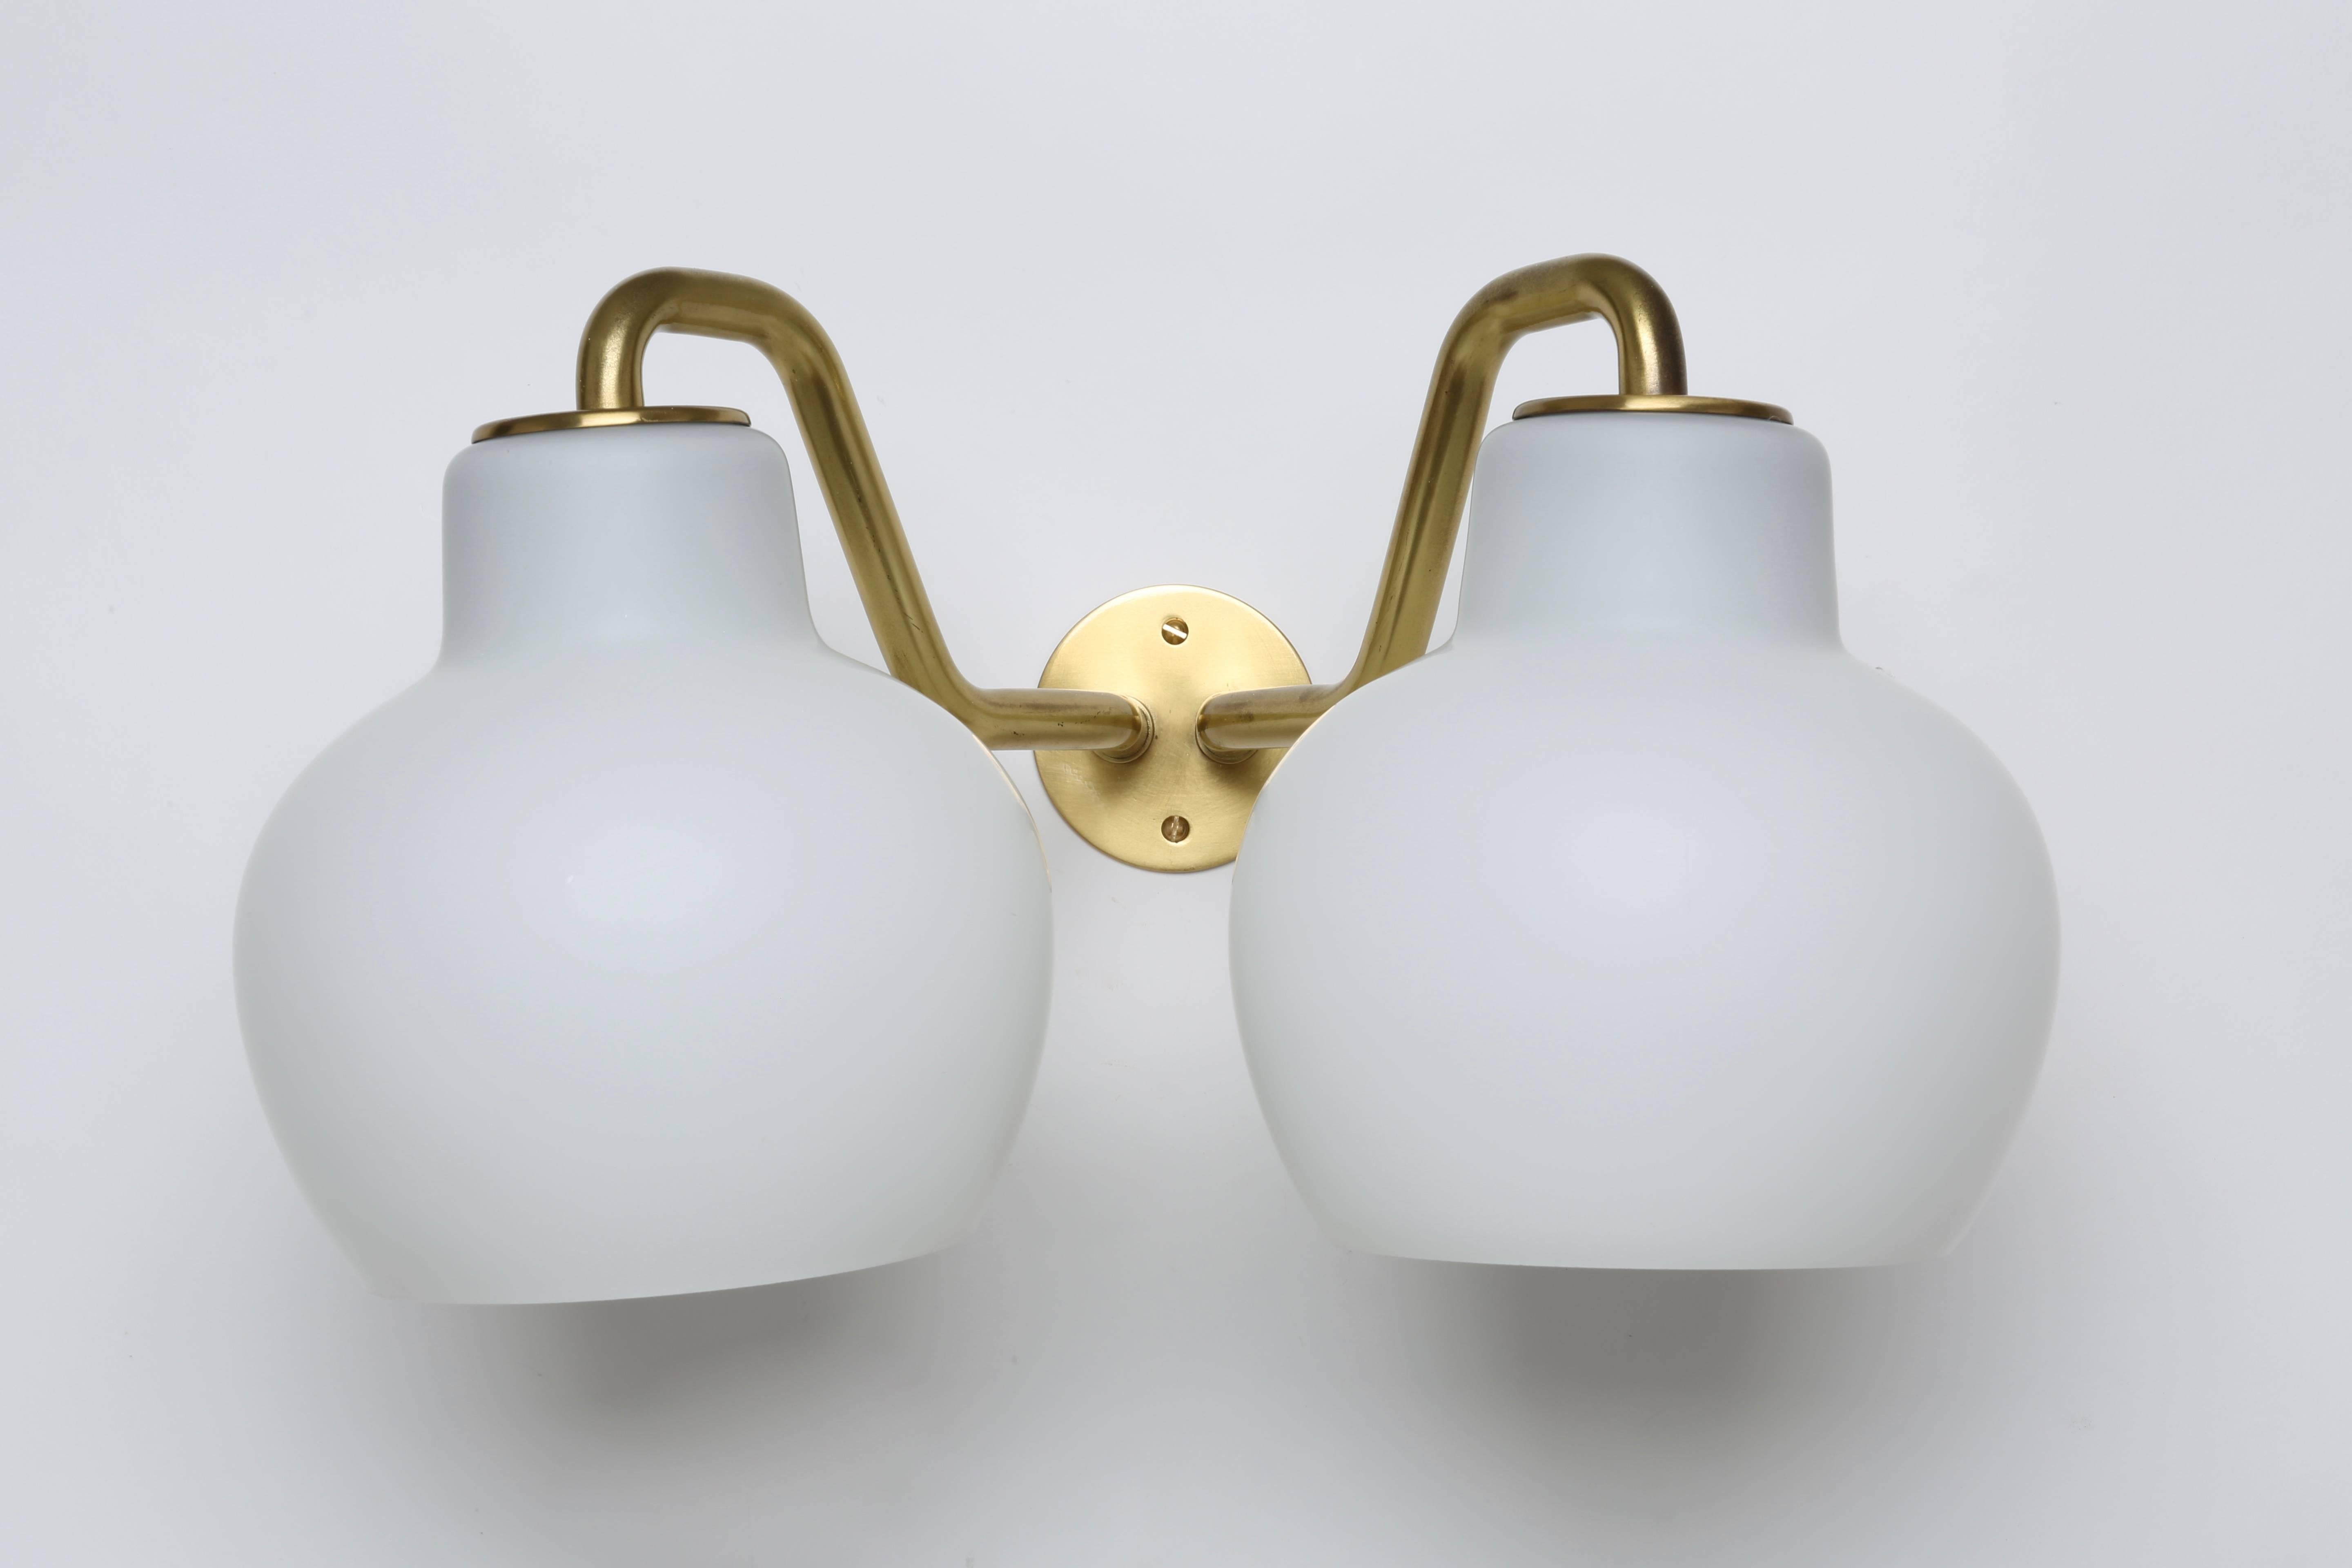 Wall lamps designed by Danish architect Vilhelm Lauritzen for Louis Poulsen.
Made with brass and handblown opaline glass.
Denmark, 1950s.
Priced per item. Three available.

 